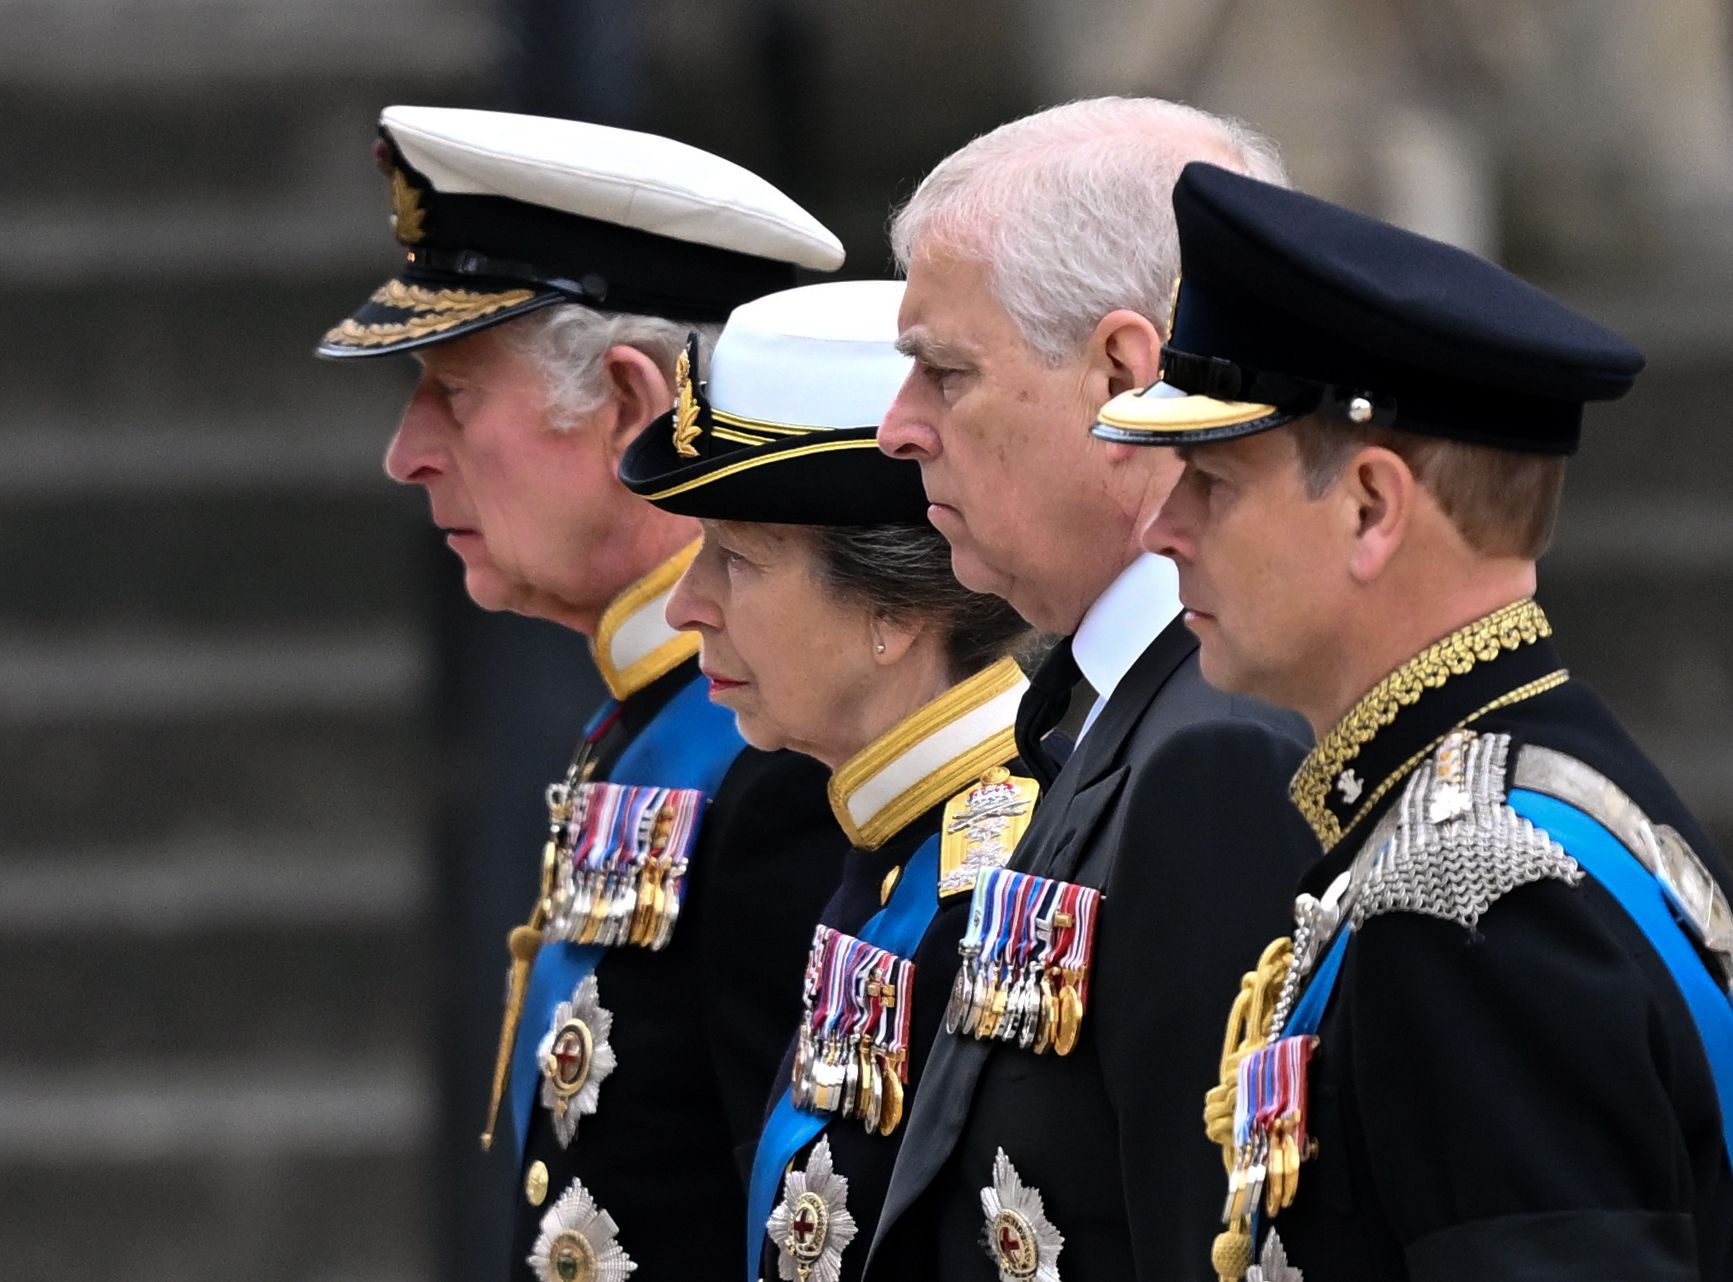 <p>King Charles III, Princess Anne, Prince Andrew and Prince Edward followed behind mother Queen Elizabeth II's coffin at Westminster Abbey in London during <a href="https://www.wonderwall.com/celebrity/royals/best-photos-from-queen-elizabeth-ii-funeral-king-charles-princes-william-prince-harry-george-charlotte-kate-meghan652347.gallery">her state funeral</a> on Sept. 19, 2022.</p>